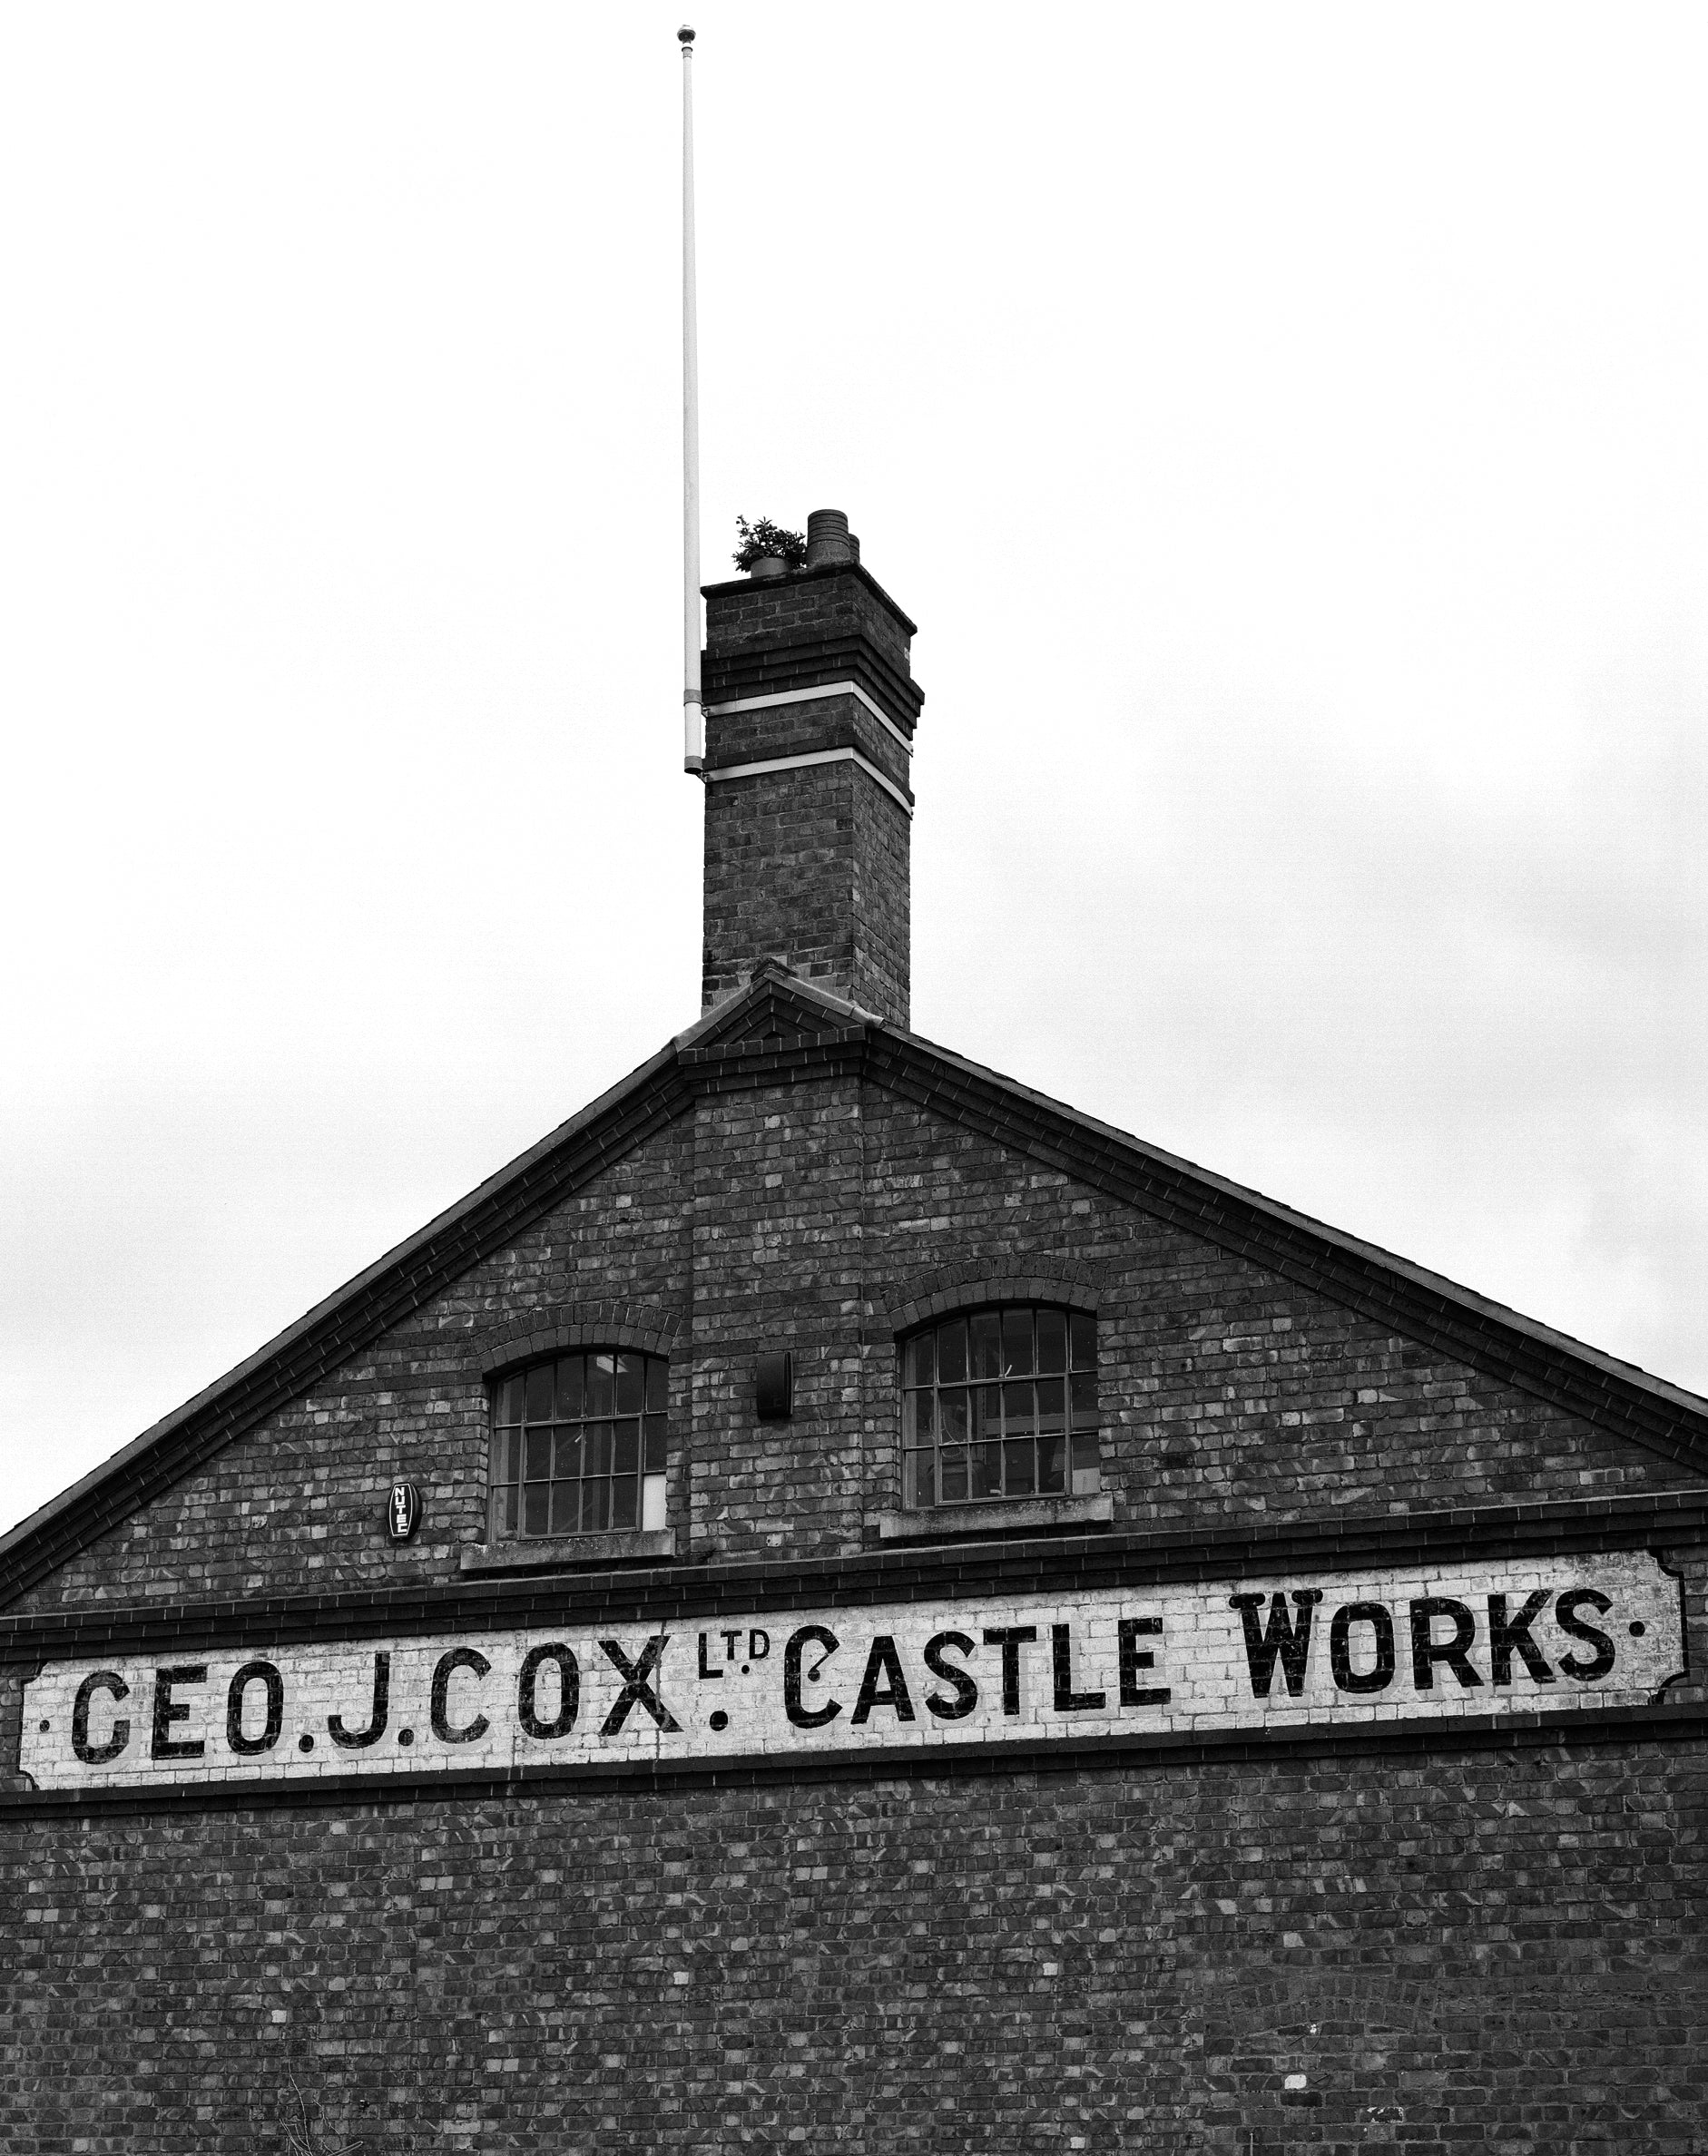 Castle works, the first George Cox factory